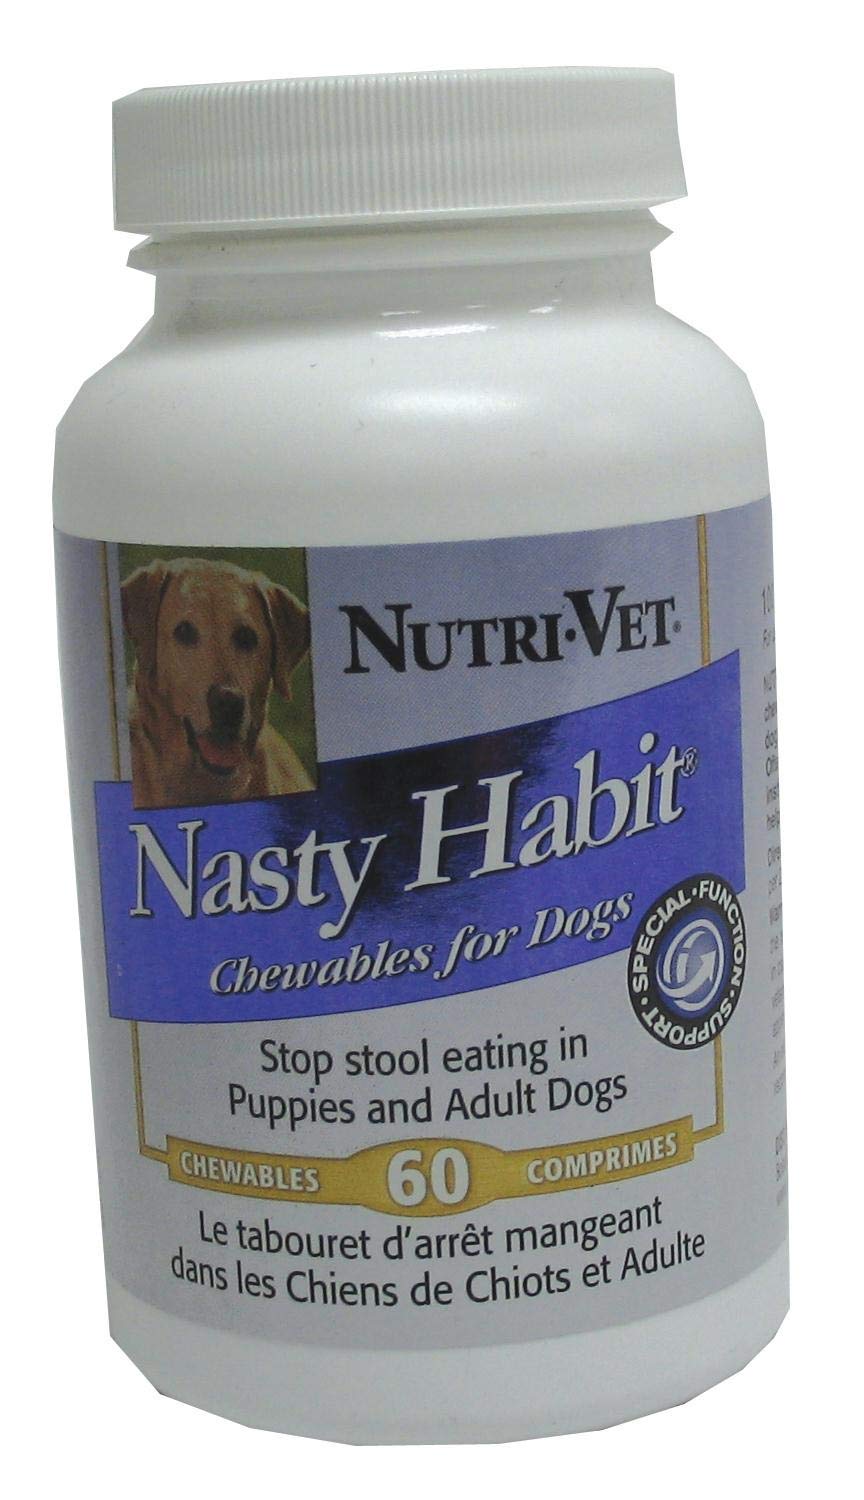 Nutri-Vet Nasty Habit Chewable Tablets for Dogs | Helps Stop Puppies and Dogs from Eating their Own Stool | 60 Count